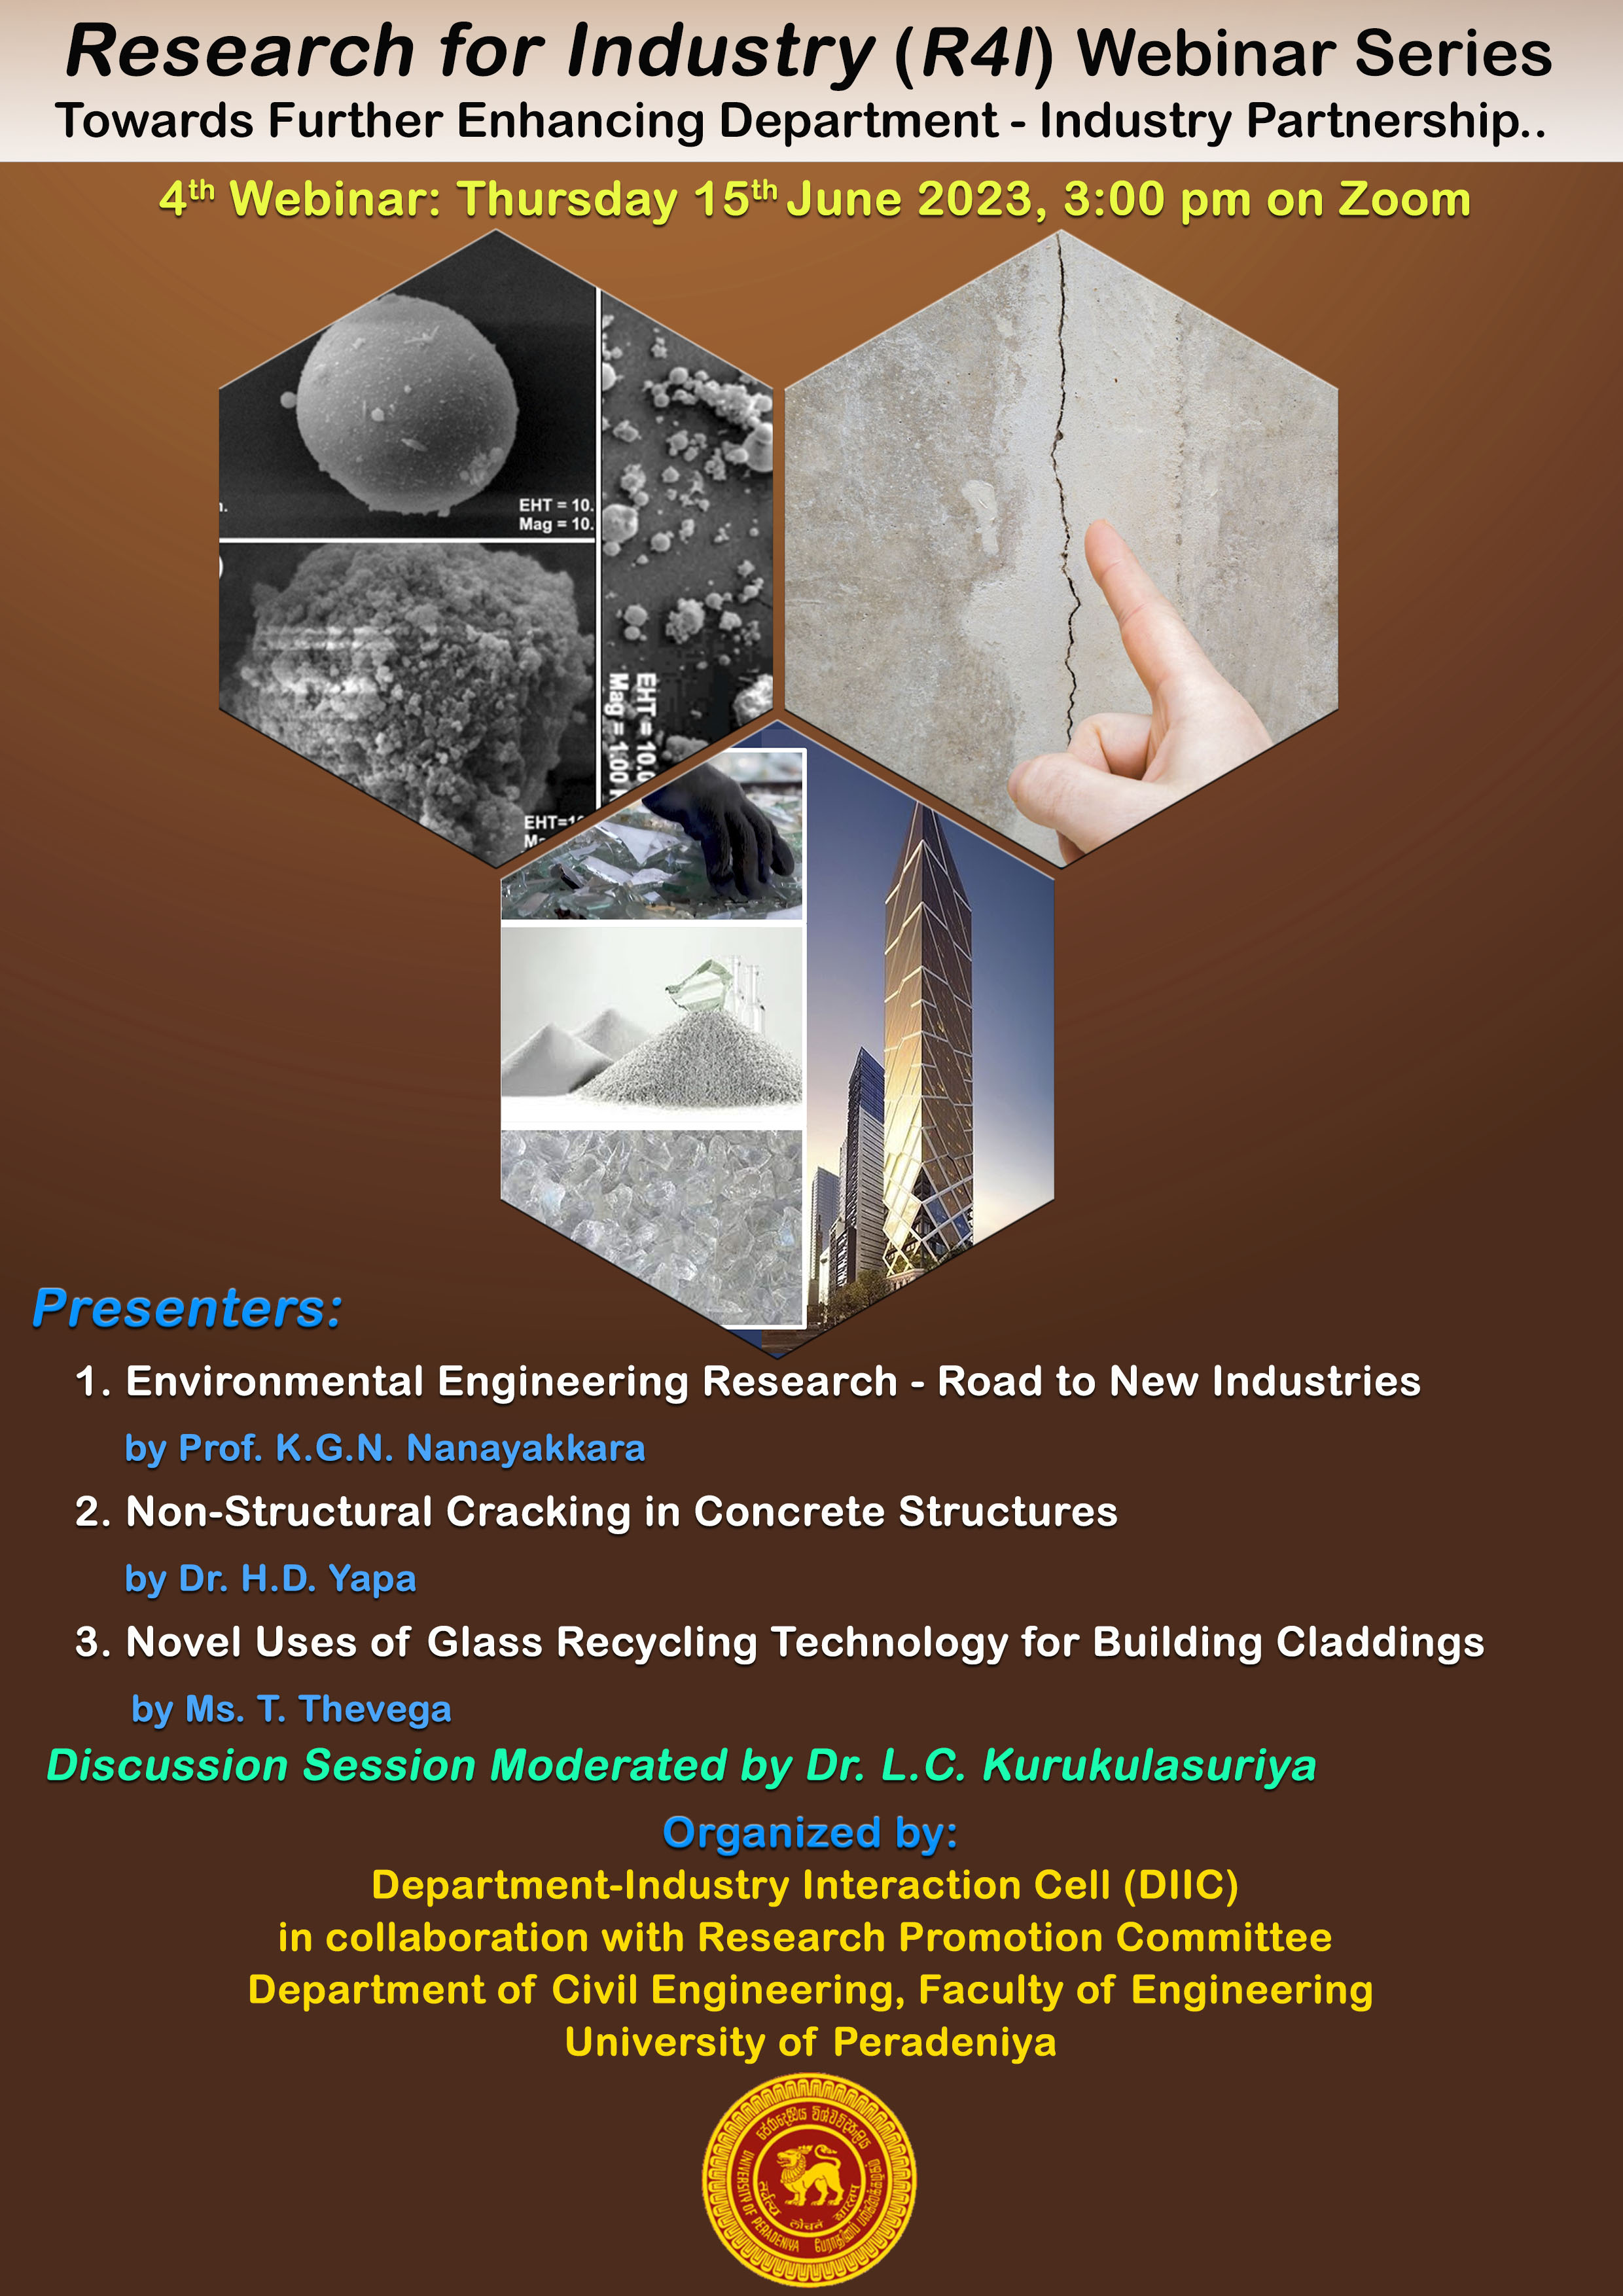 4th Research for Industry (R4I) Webinar